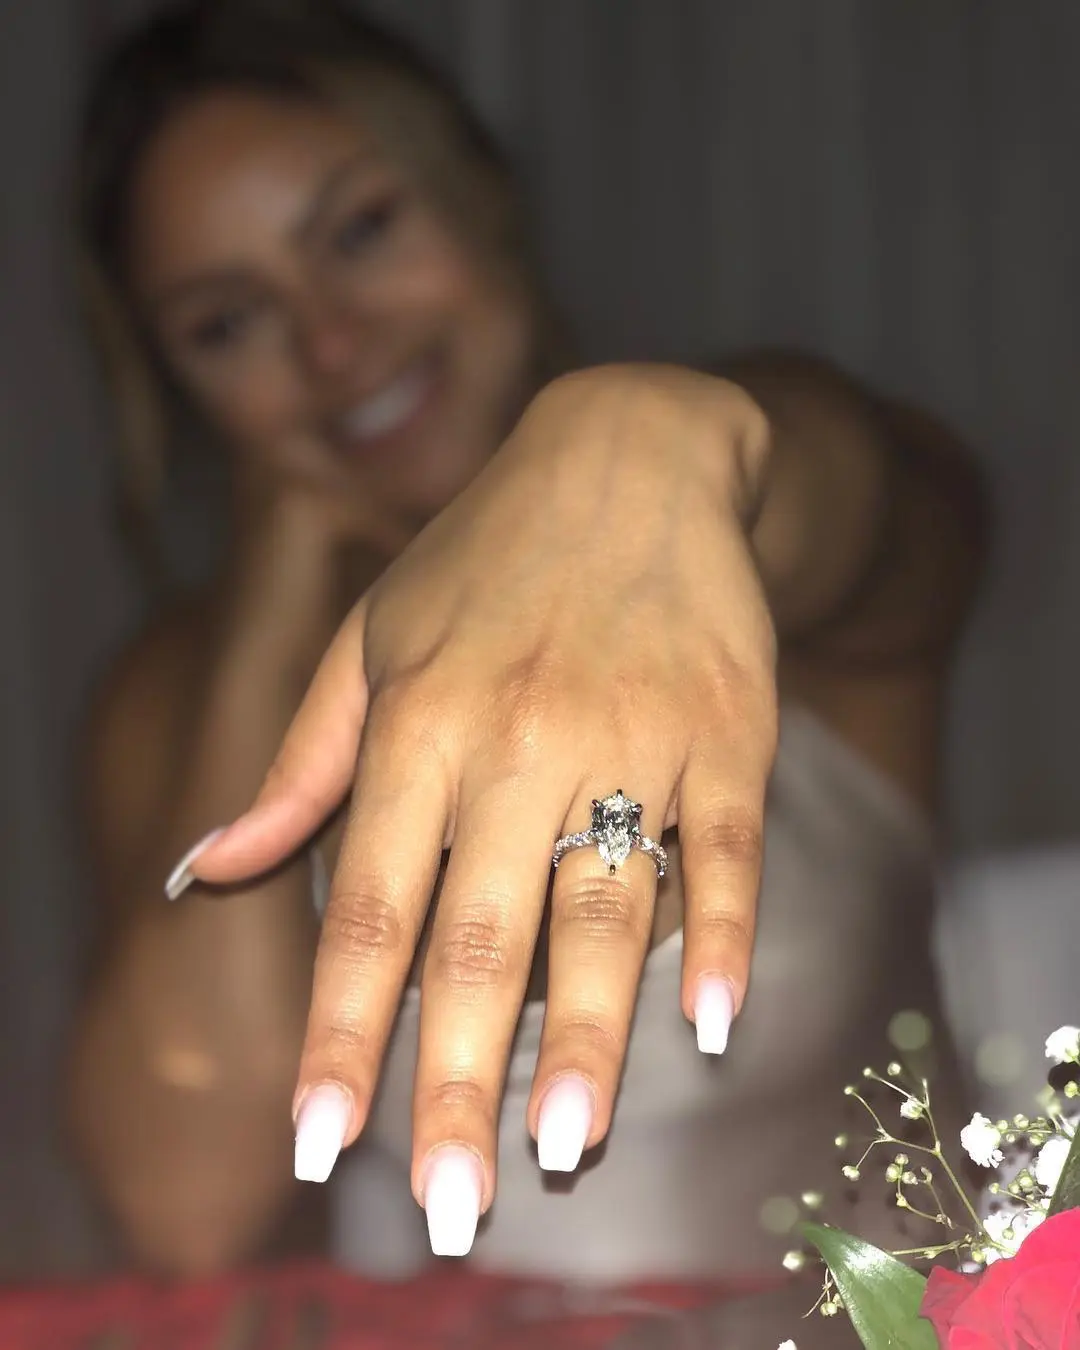 Neal's girlfriend turned fiancée displaying her engagement ring